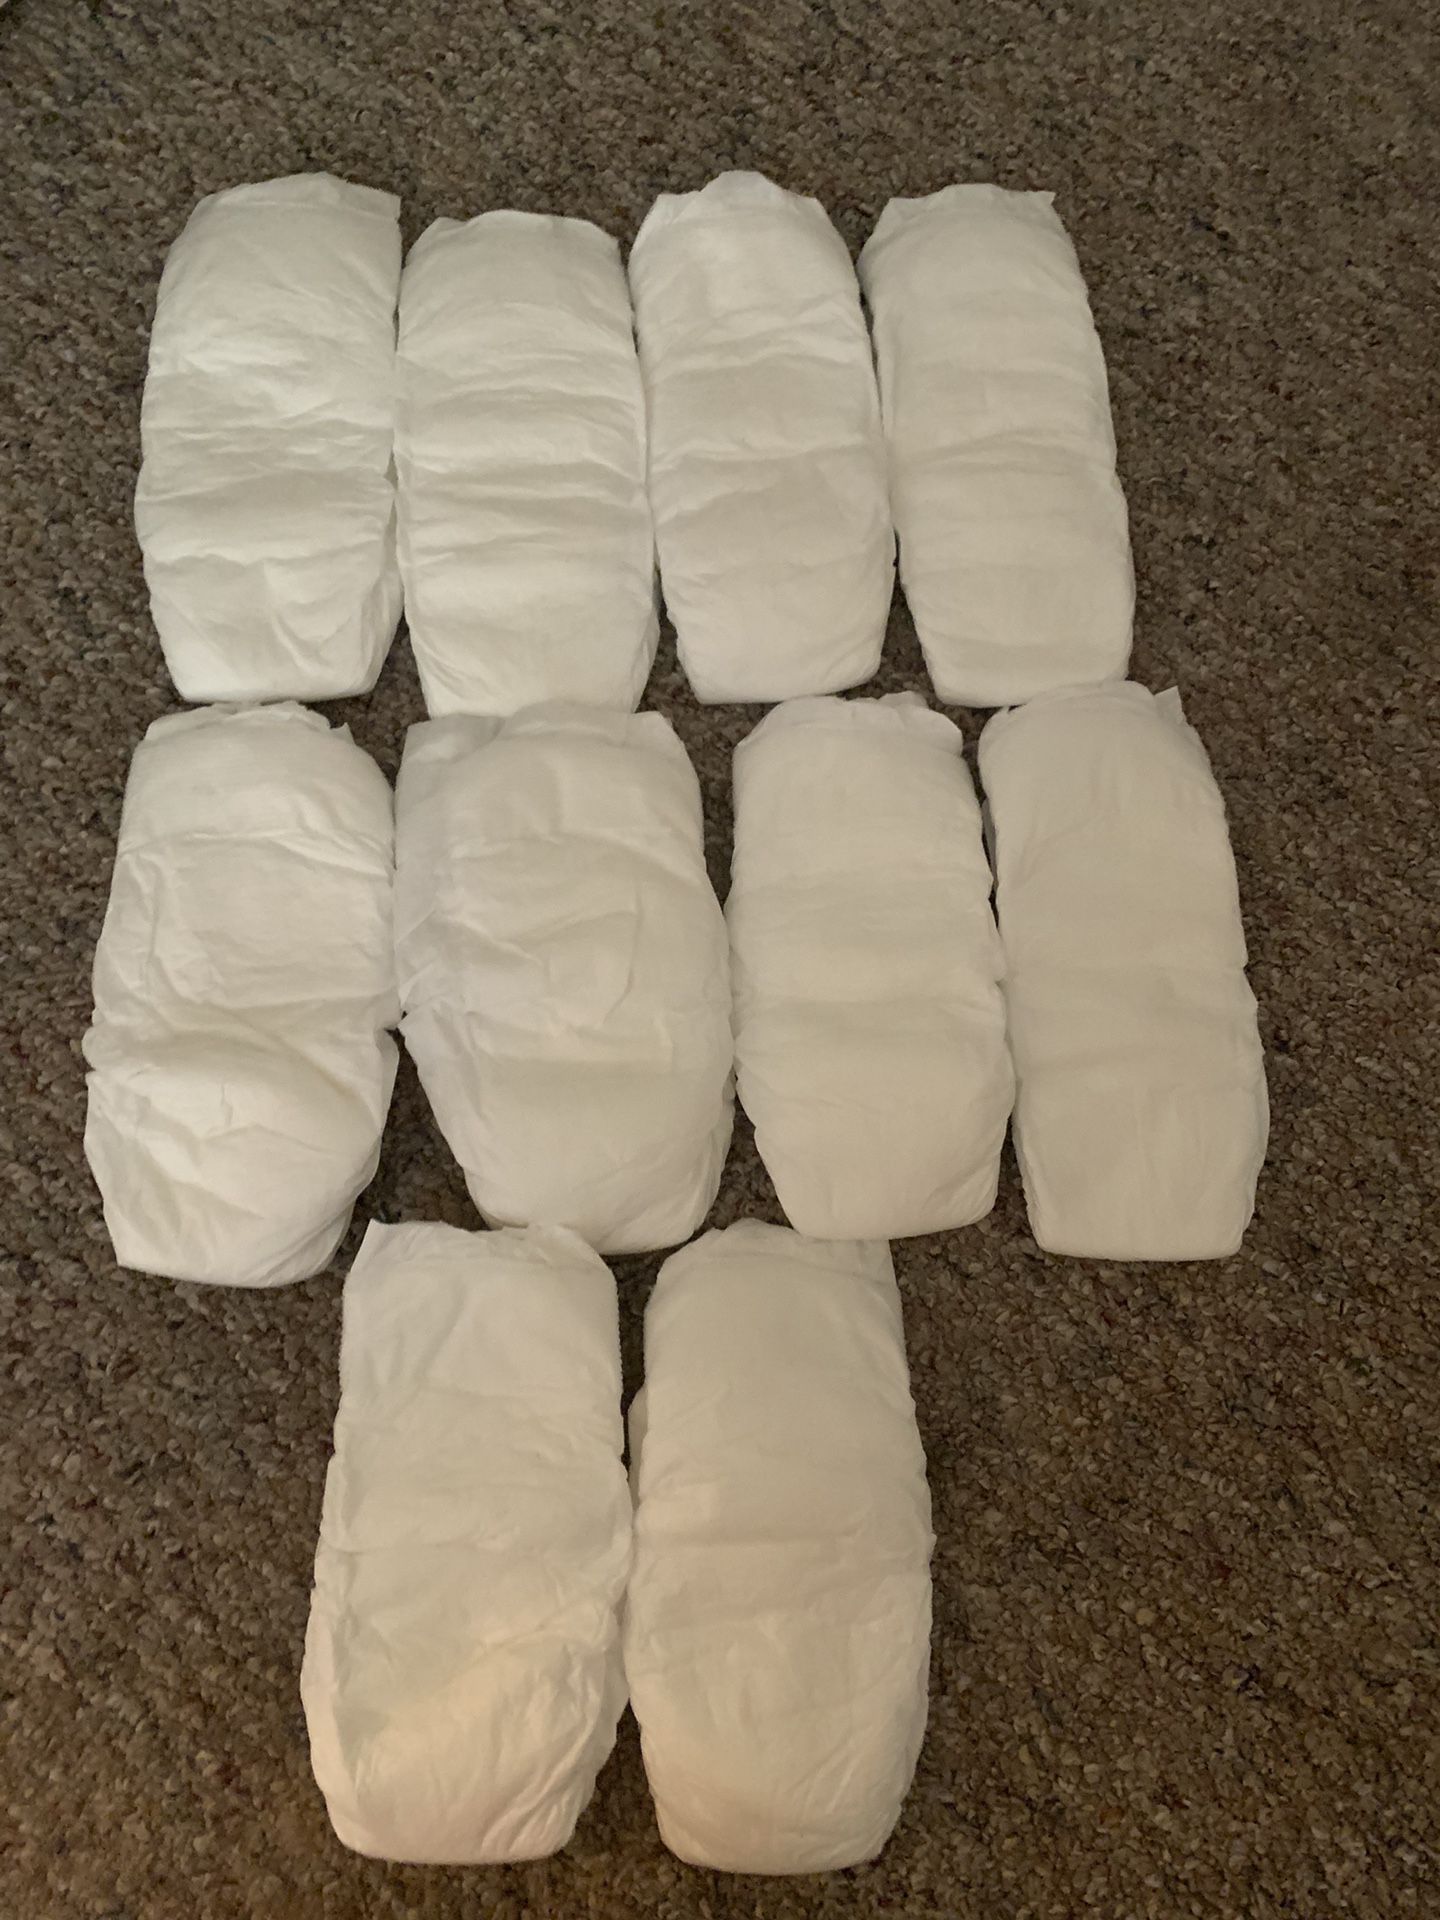 Size 7 Diapers